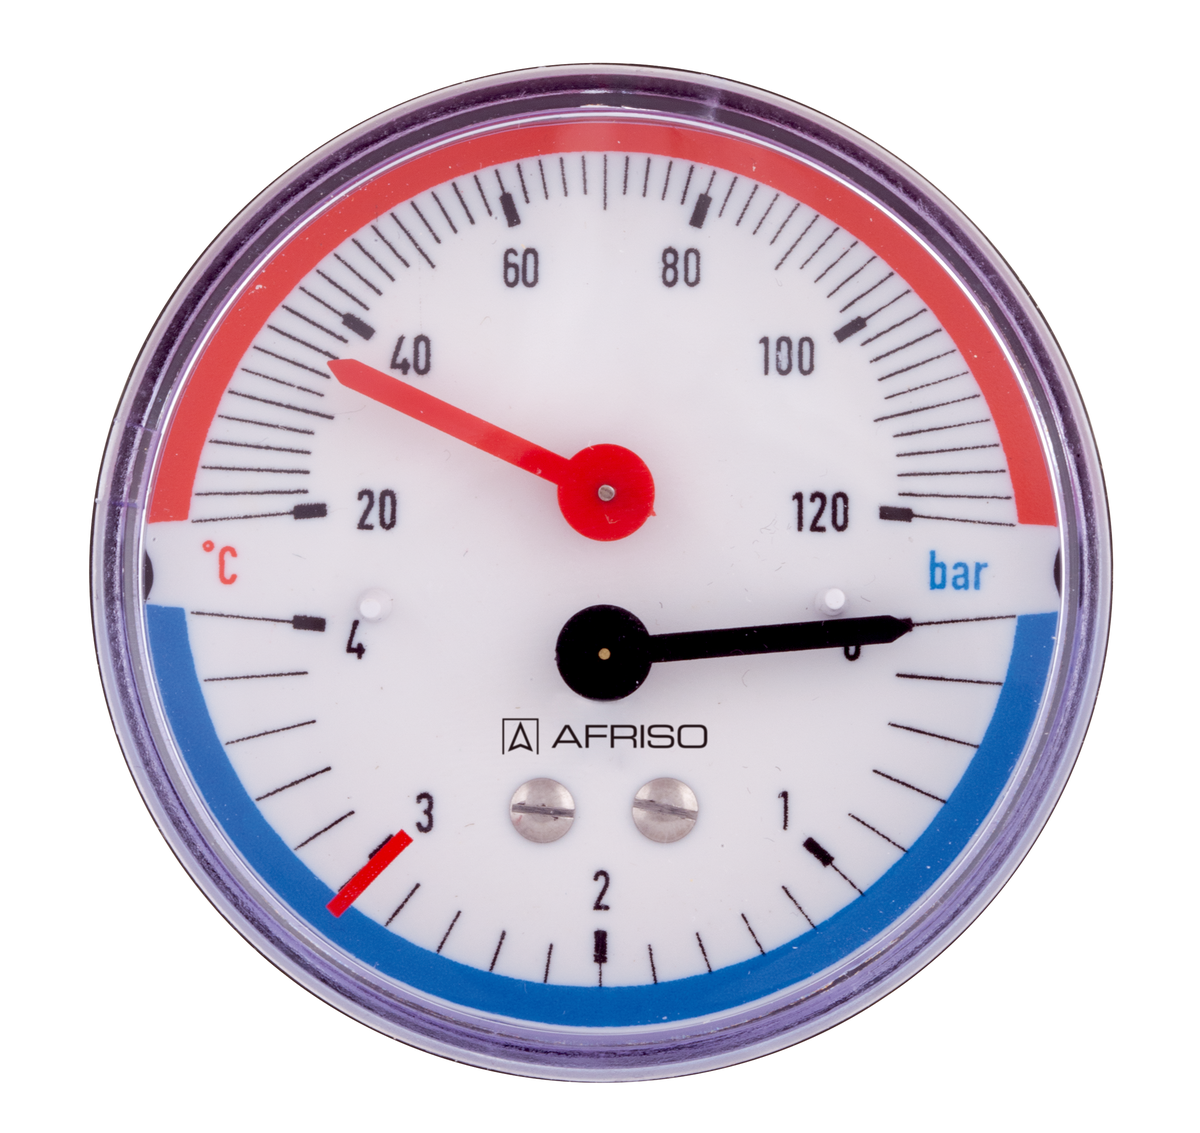 AFRISO Thermo-Manometer TM 63 20/120C 0/4bar G1/2B axial mit Ventil/Adapter VOR 16490 16540